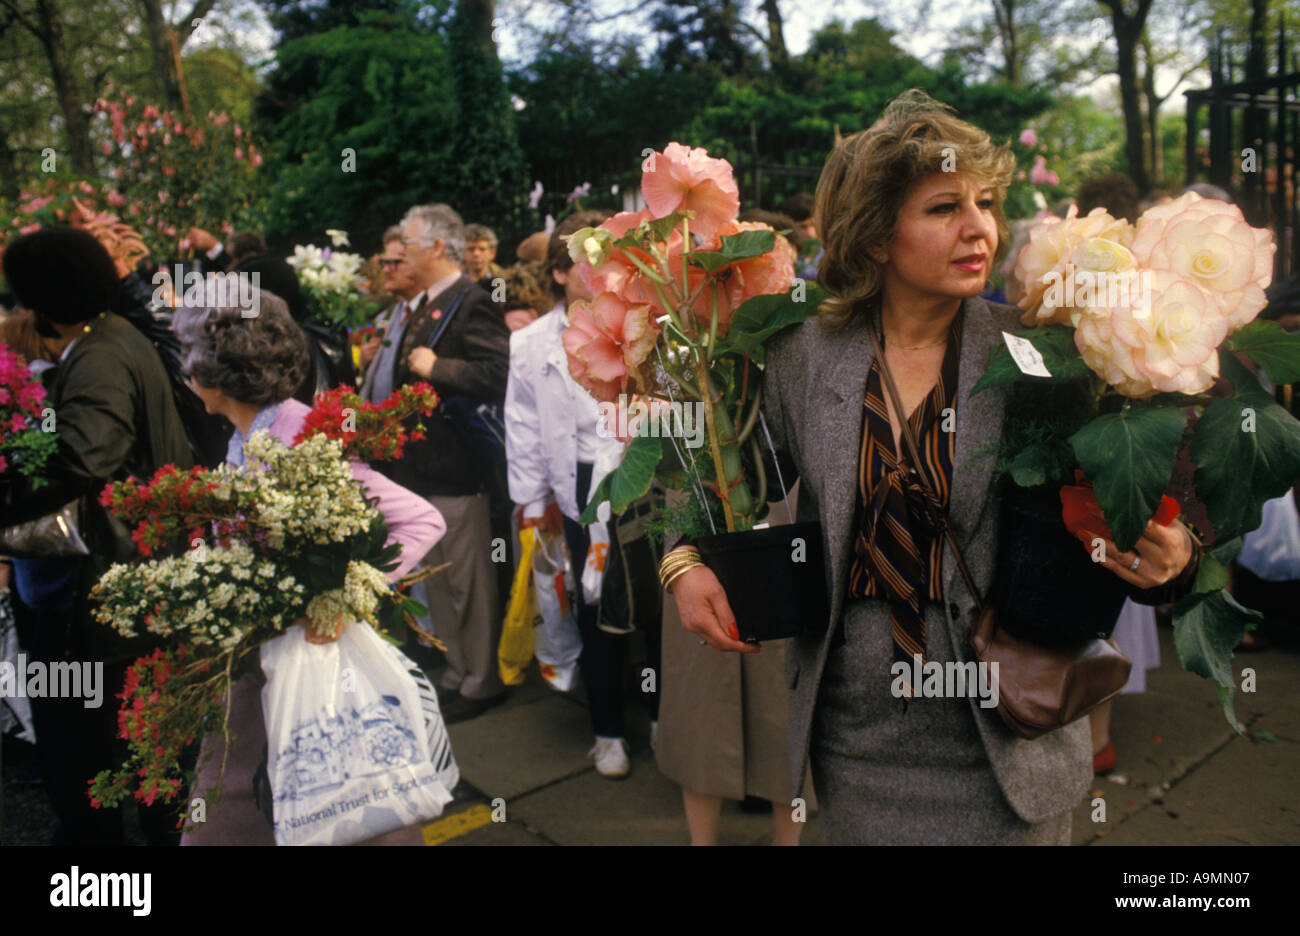 Last day of the Chelsea Flower show 1990s London UK. Visitor to the flower show taking home some of the displayed flowers HOMER SYKES Stock Photo